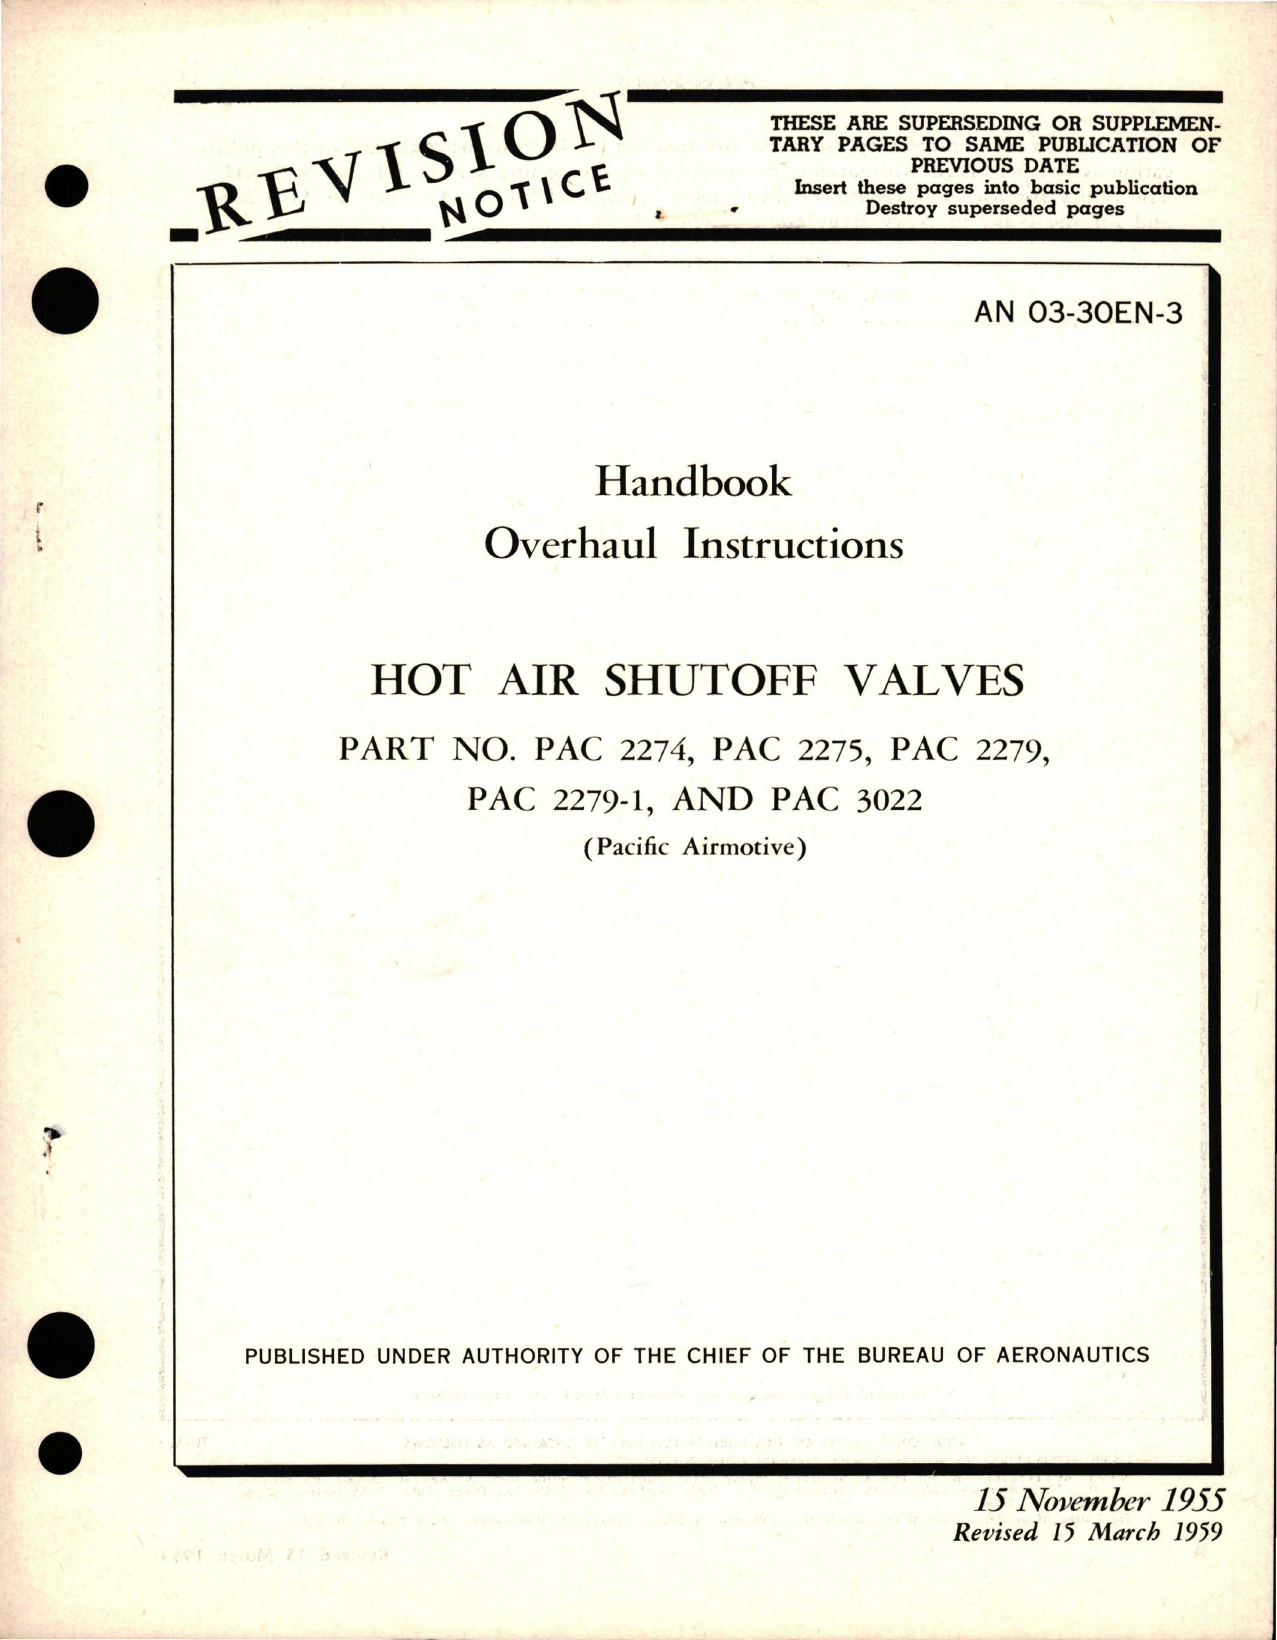 Sample page 1 from AirCorps Library document: Overhaul Instructions for Hot Air Shutoff Valve - Parts PAC 2274, PAC 2275, PAC 2279, PAC 2279-1, and PAC 3022 